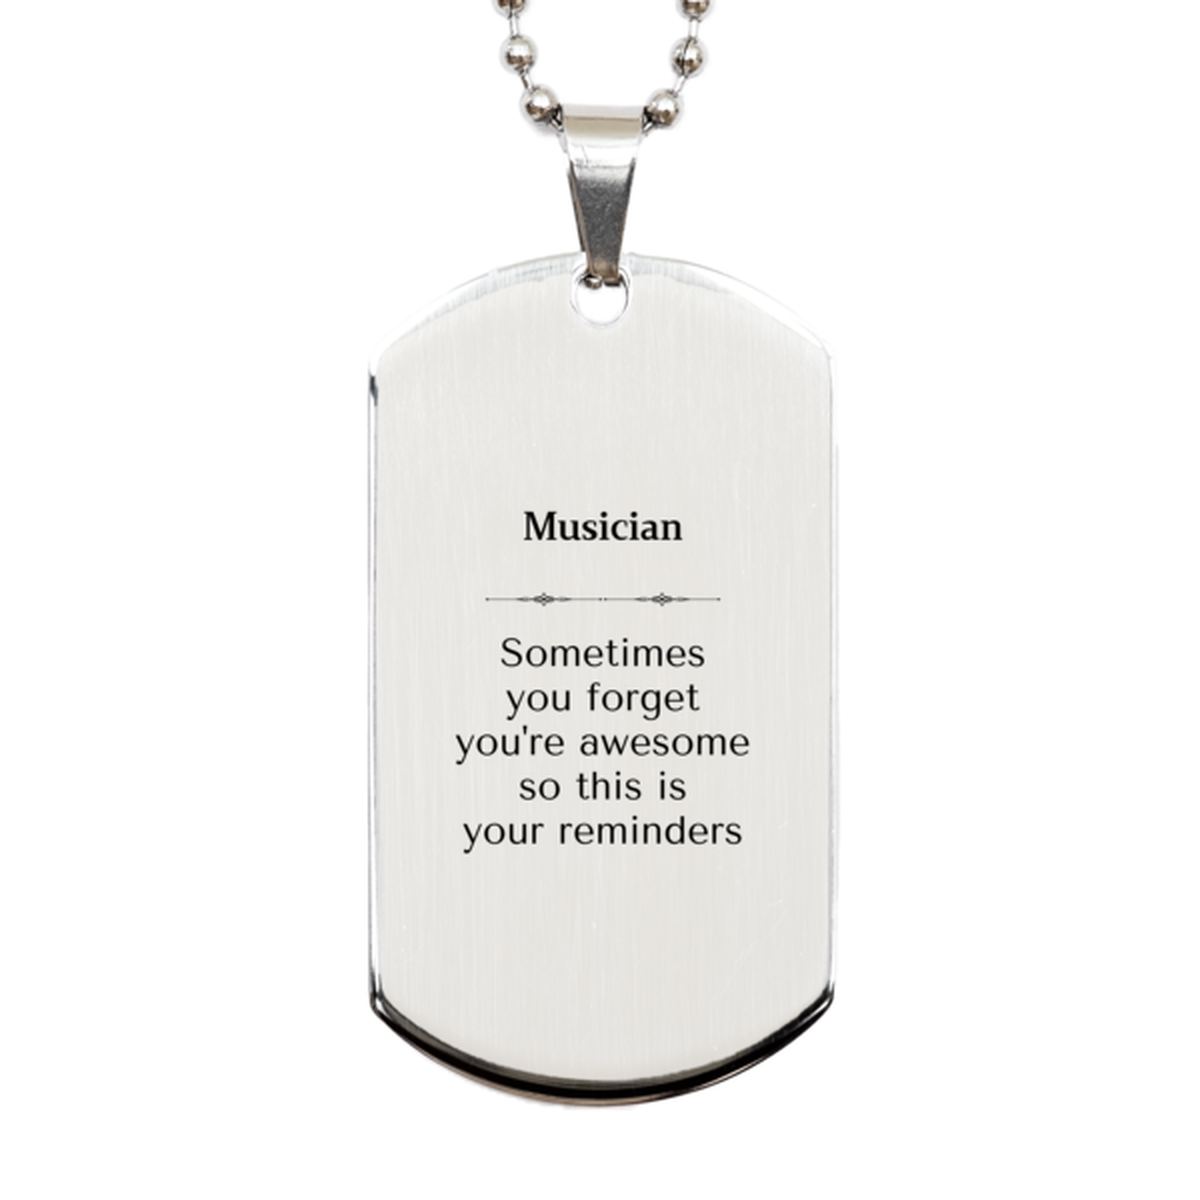 Sentimental Musician Silver Dog Tag, Musician Sometimes you forget you're awesome so this is your reminders, Graduation Christmas Birthday Gifts for Musician, Men, Women, Coworkers